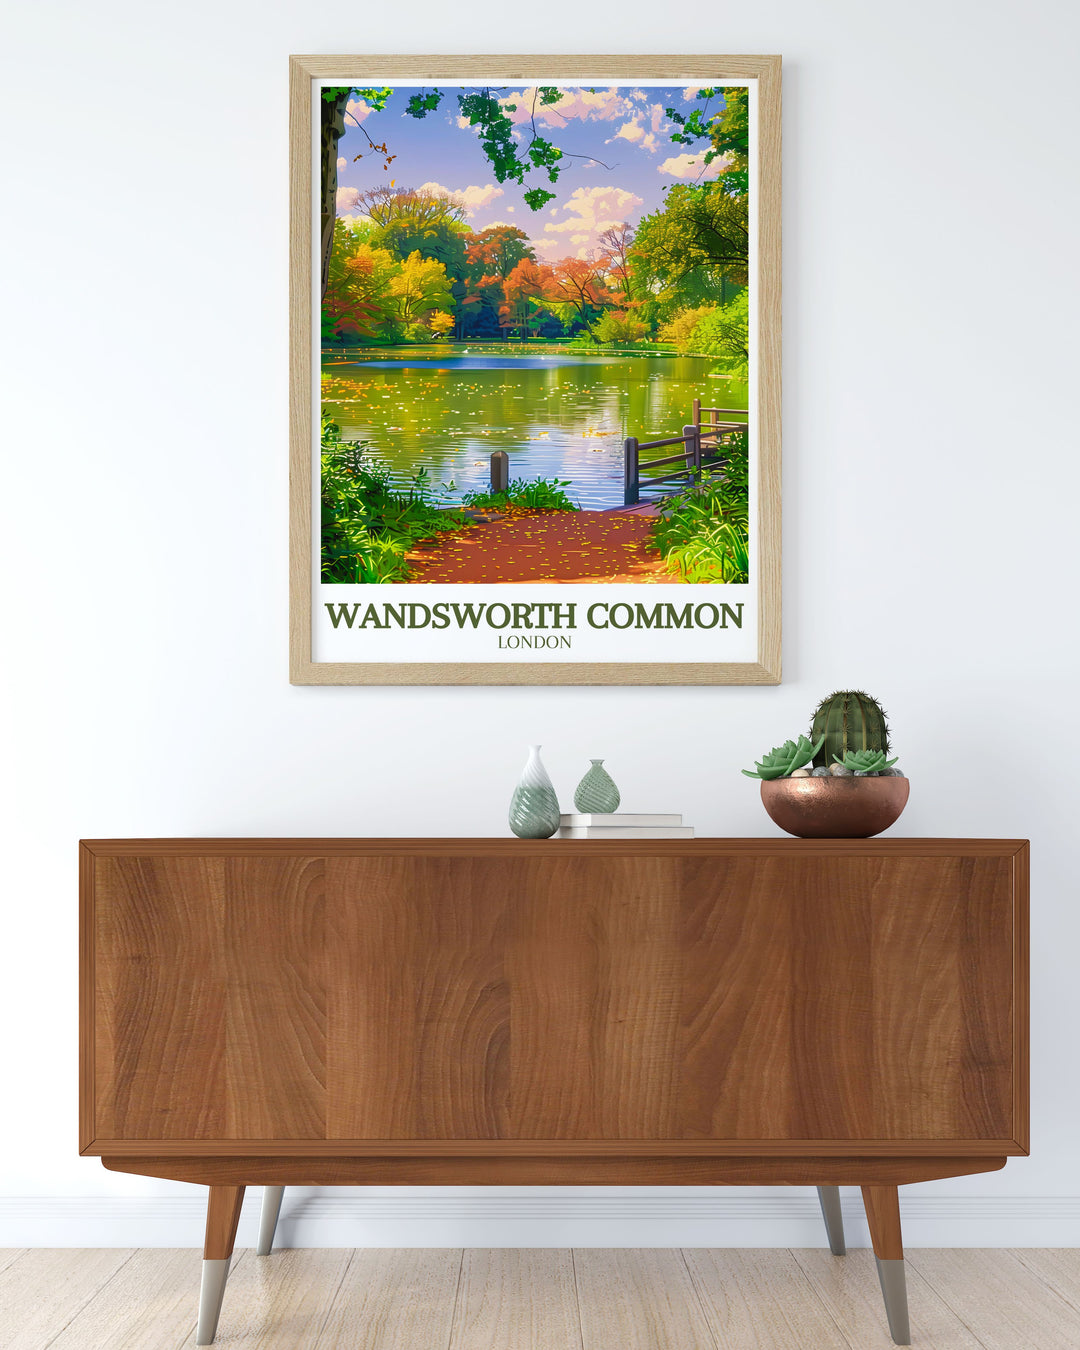 Decorate your space with a stunning Wandsworth Common poster. Featuring key landmarks like the Wandsworth Windmill and the tranquil Wandsworth Pond, this London travel poster brings the essence of South London into your home.